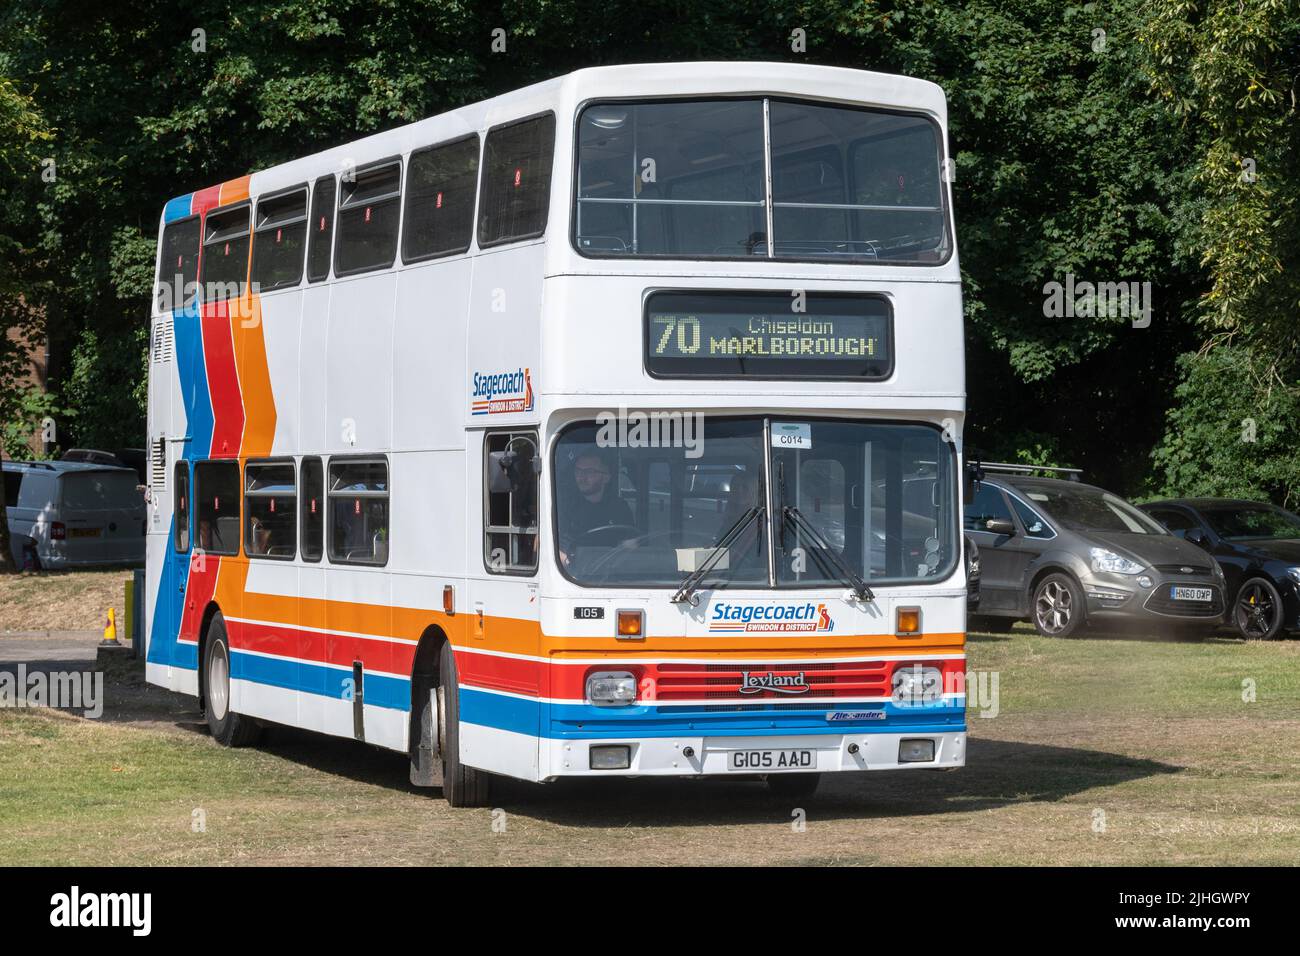 Swindon & District Stagecoach double-decker bus, a 1990 Leyland bus with multi-colour livery, at a transport event in Hampshire, England, UK Stock Photo